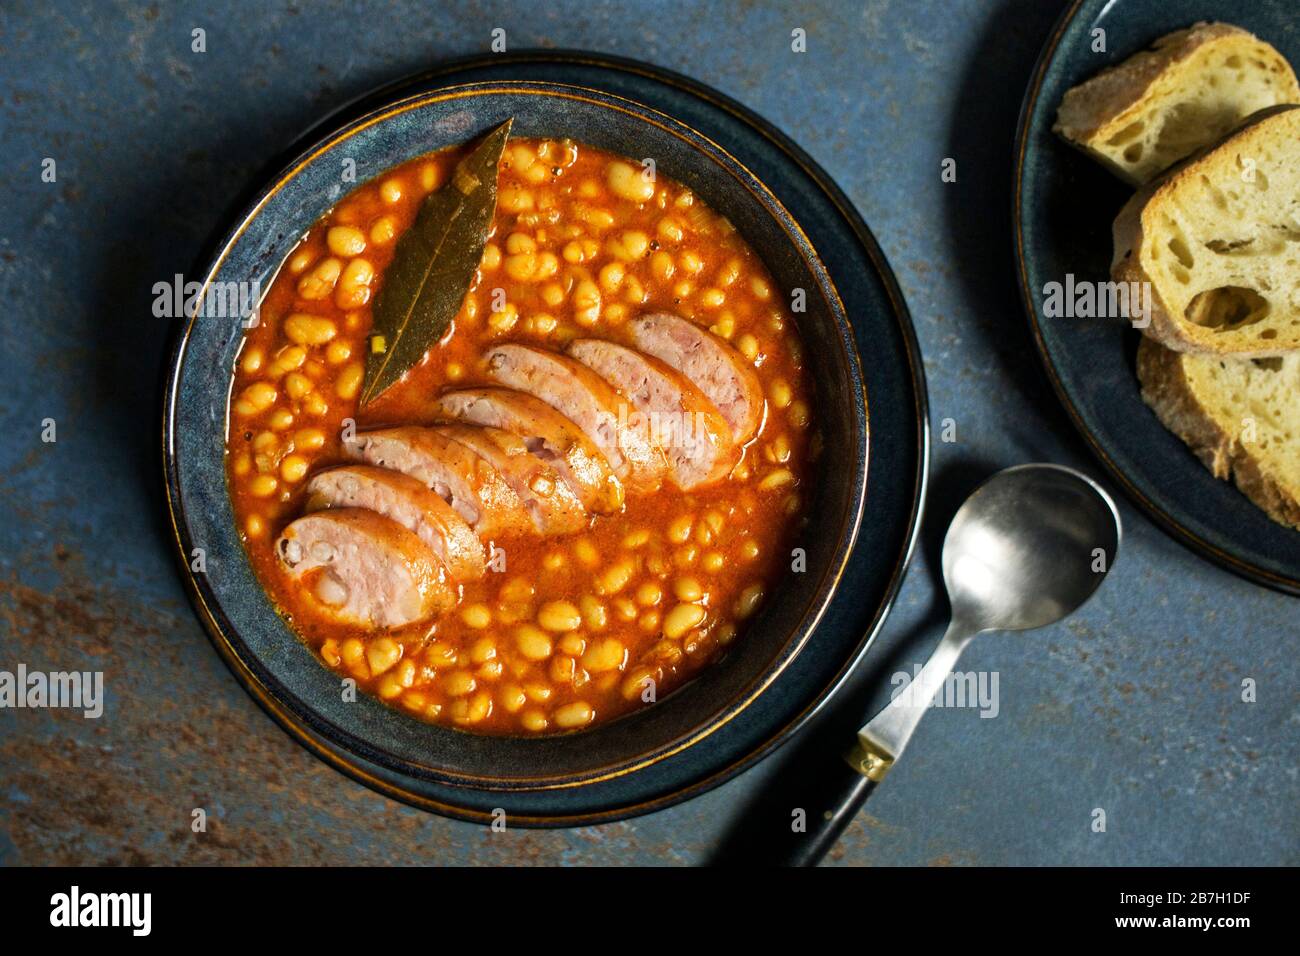 Baked beans stew with tomato sauce and sausage with herbs Stock Photo